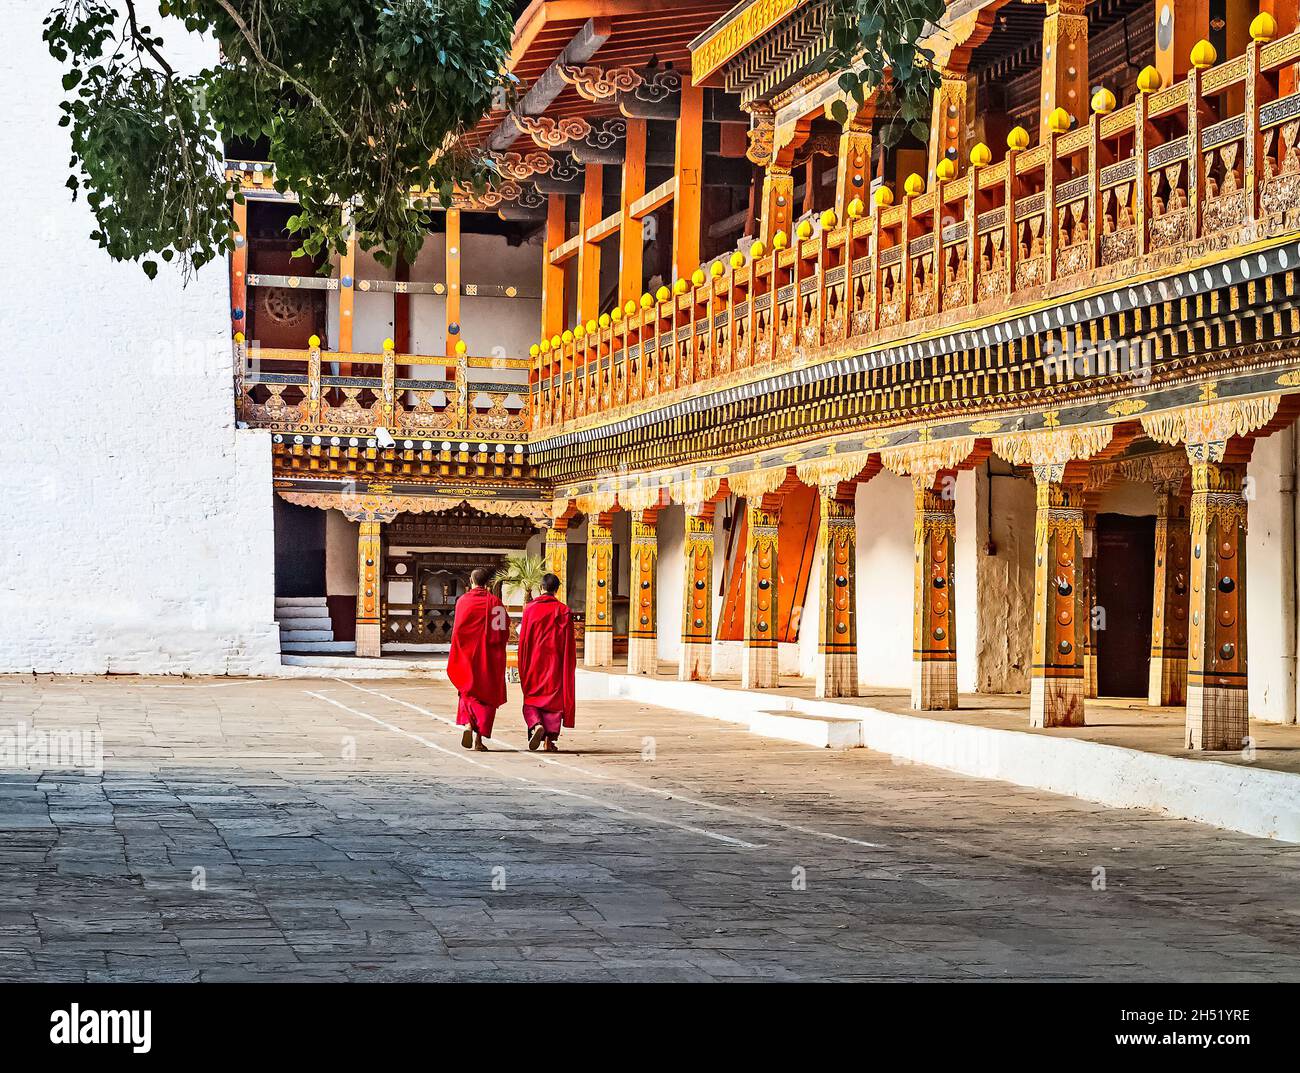 Two Buddhist monks in their traditional red dress walking in the monastery Punakha Dzong courtyard, Bhutan. Stock Photo